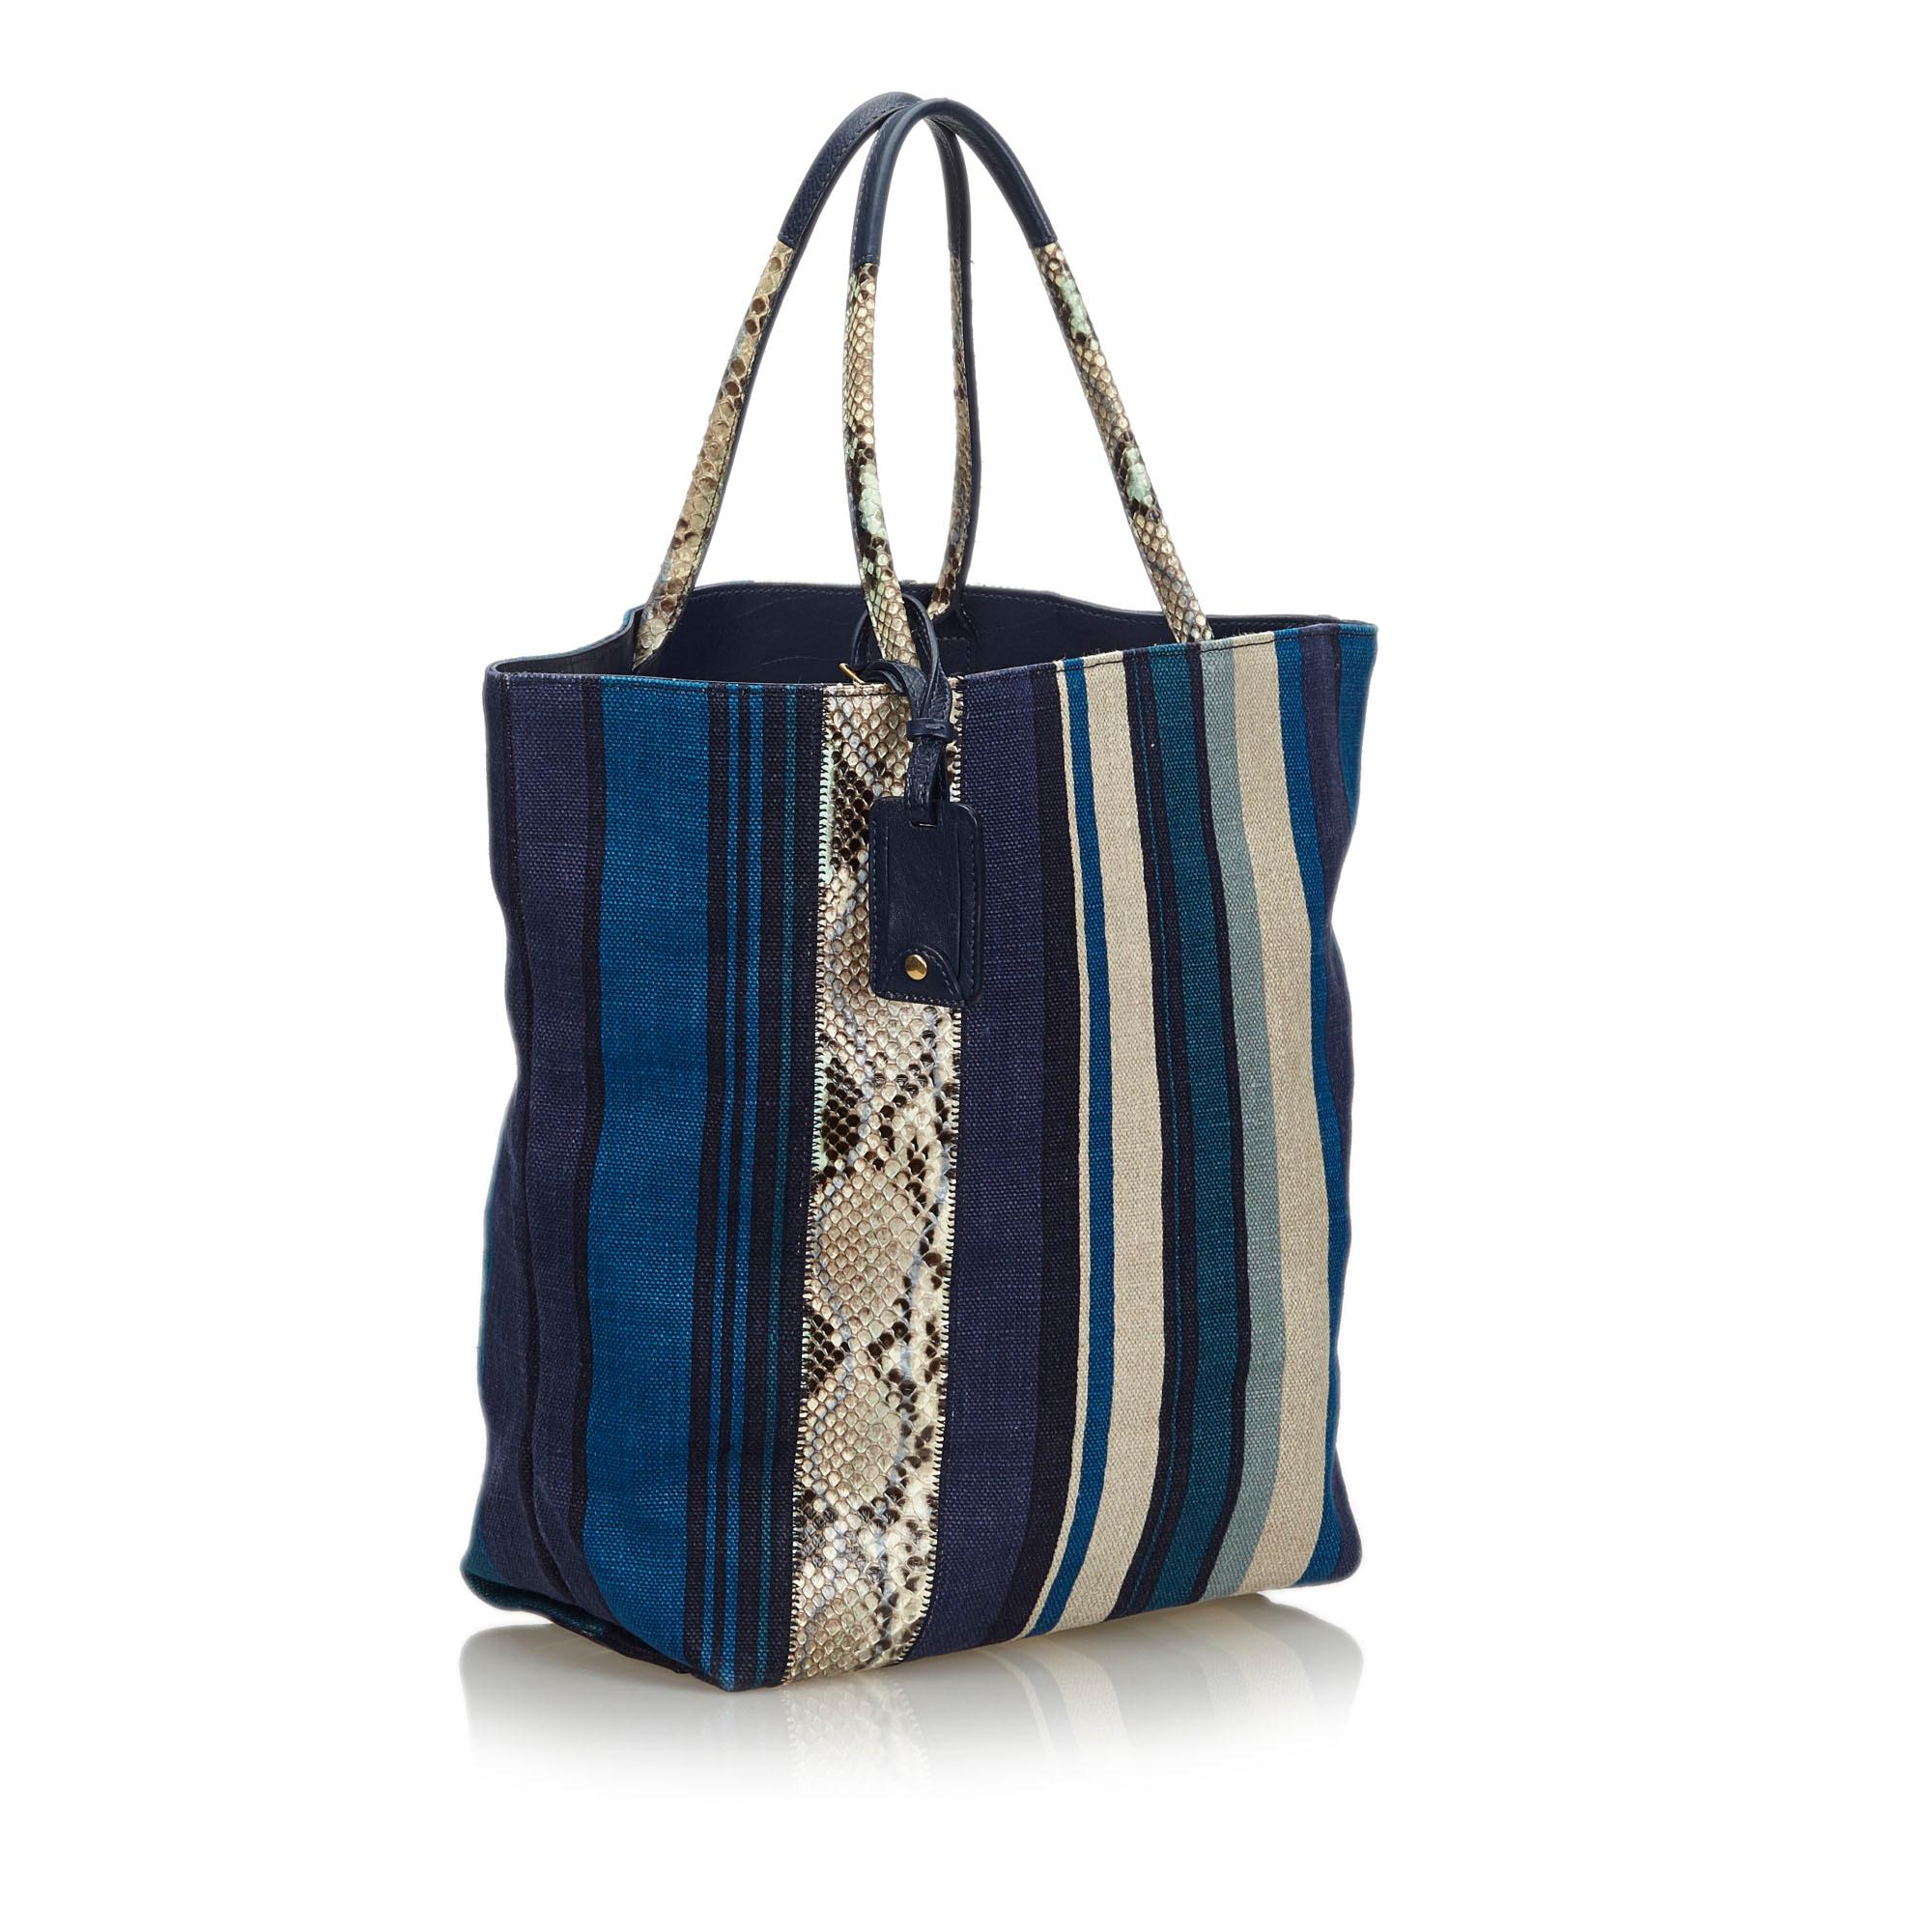 This tote bag features a printed canvas body with a python leather trim, flat leather handles, an open top, an interior zip pocket. It carries as AB condition rating.

Inclusions: 
This item does not come with inclusions.

Dimensions:
Length: 35.00